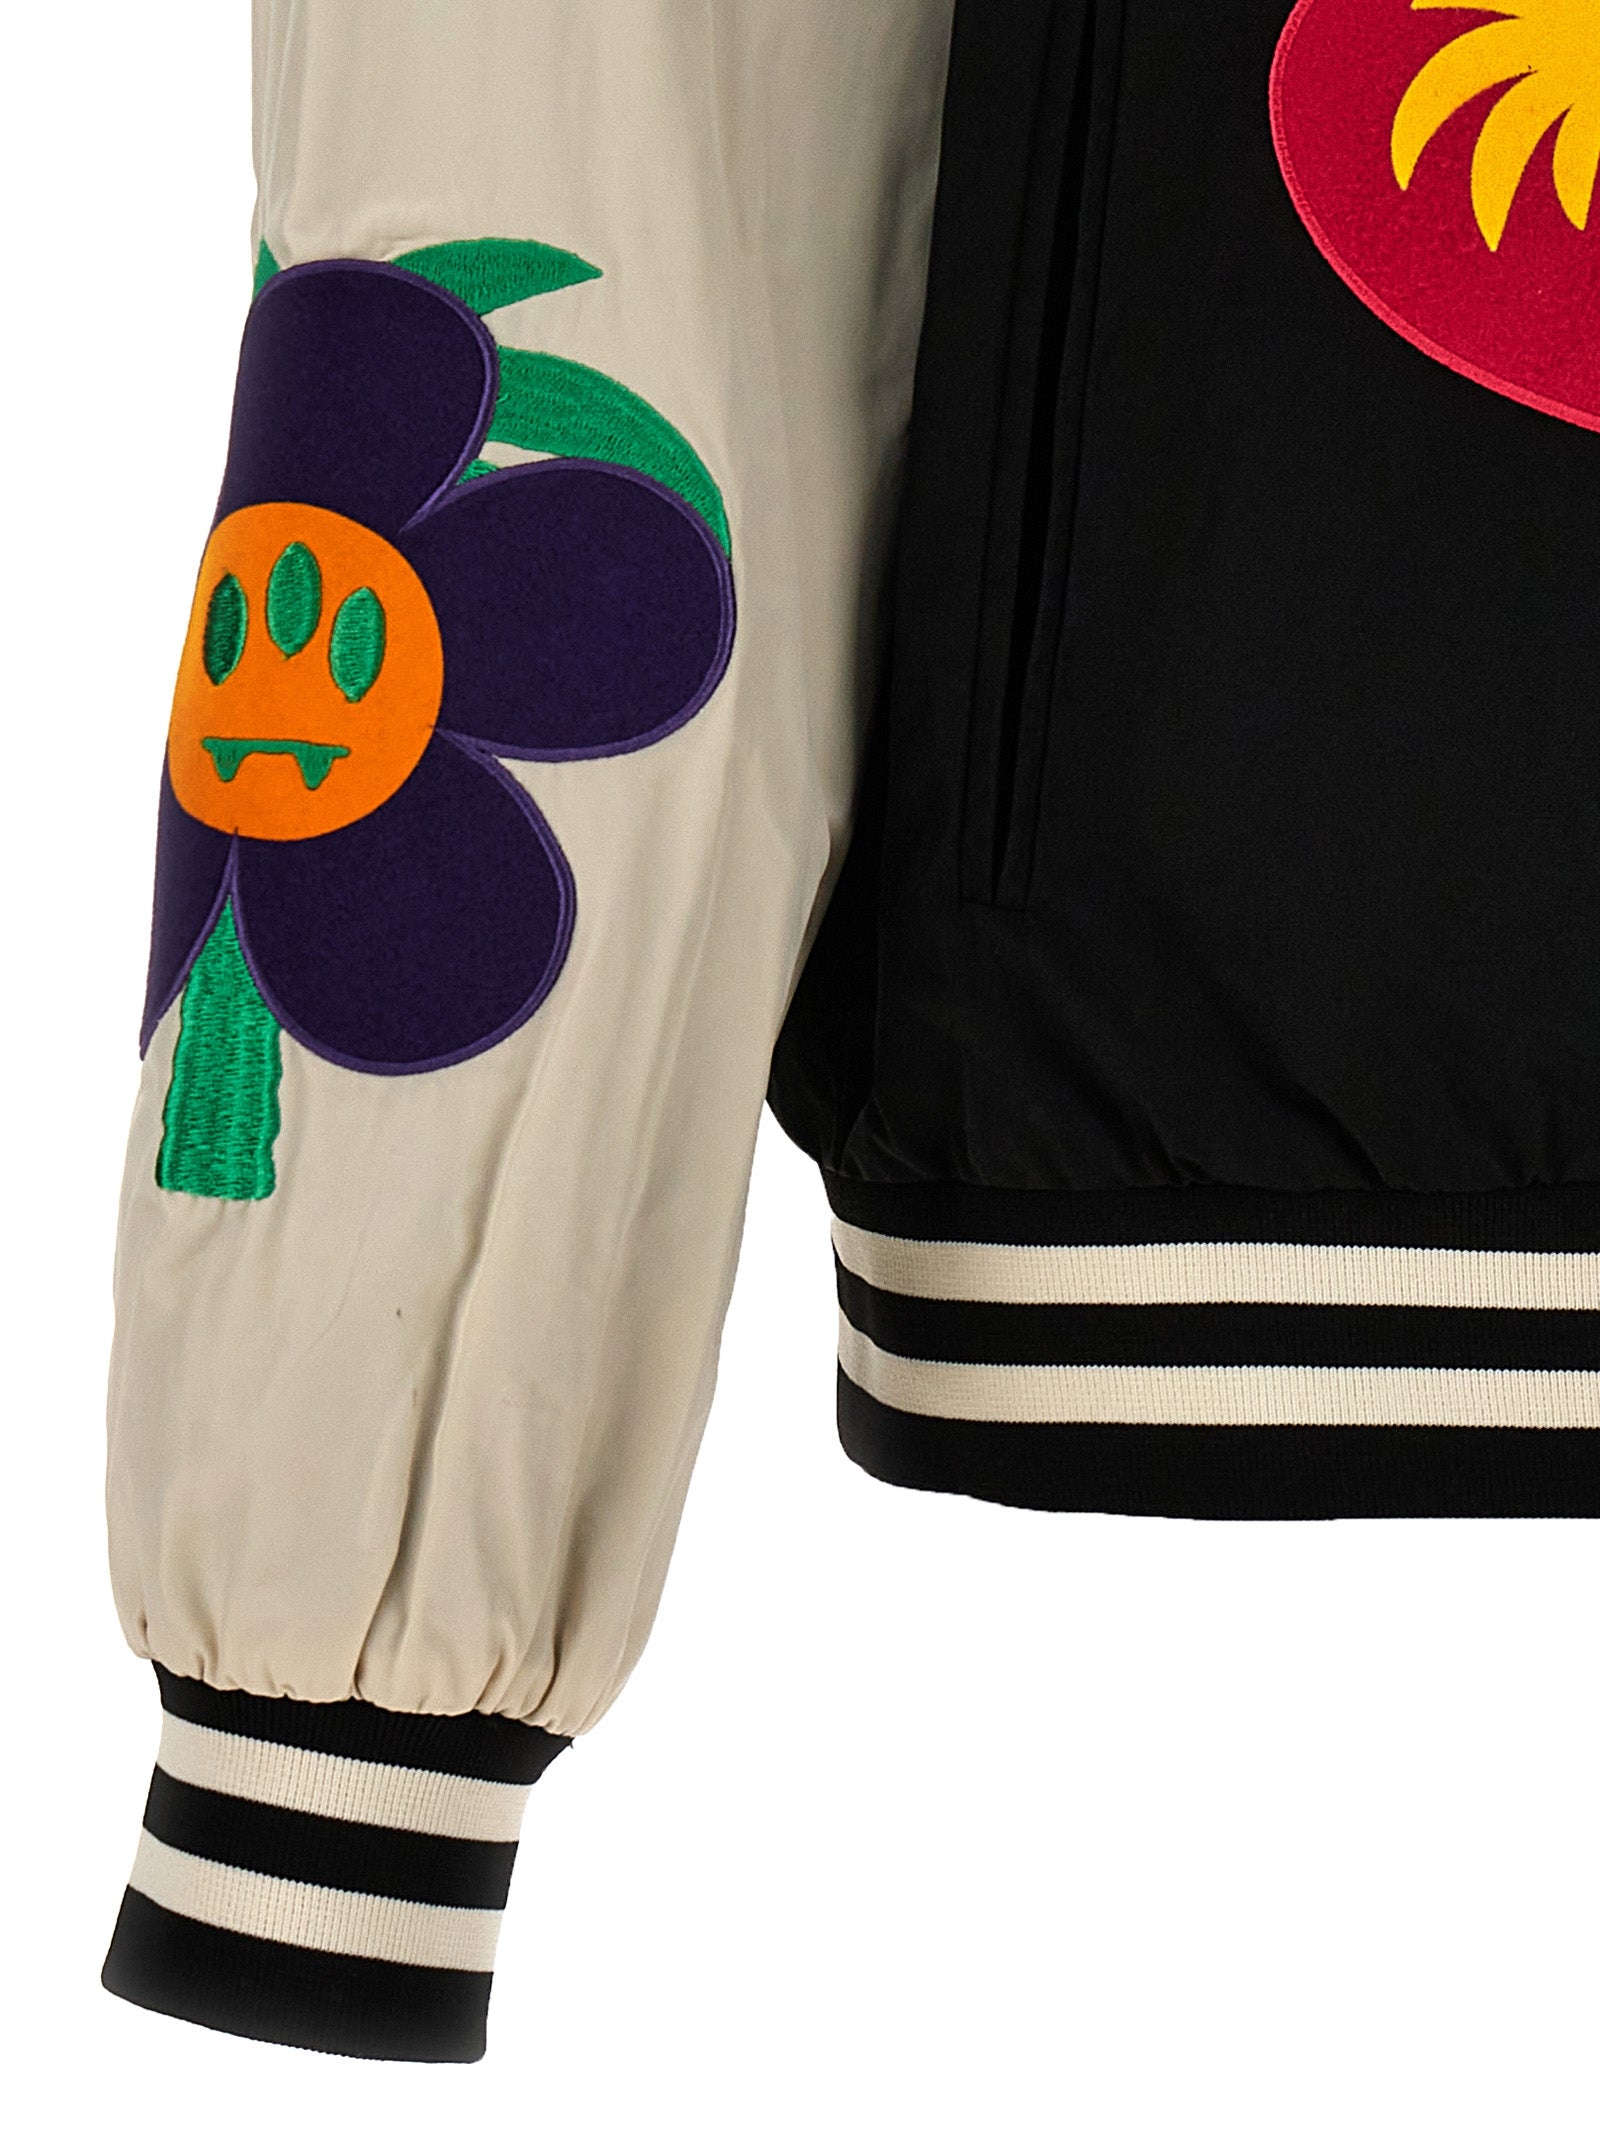 Shop Barrow Embroidery Bomber Jacket And Patches Casual Jackets, Parka Multicolor